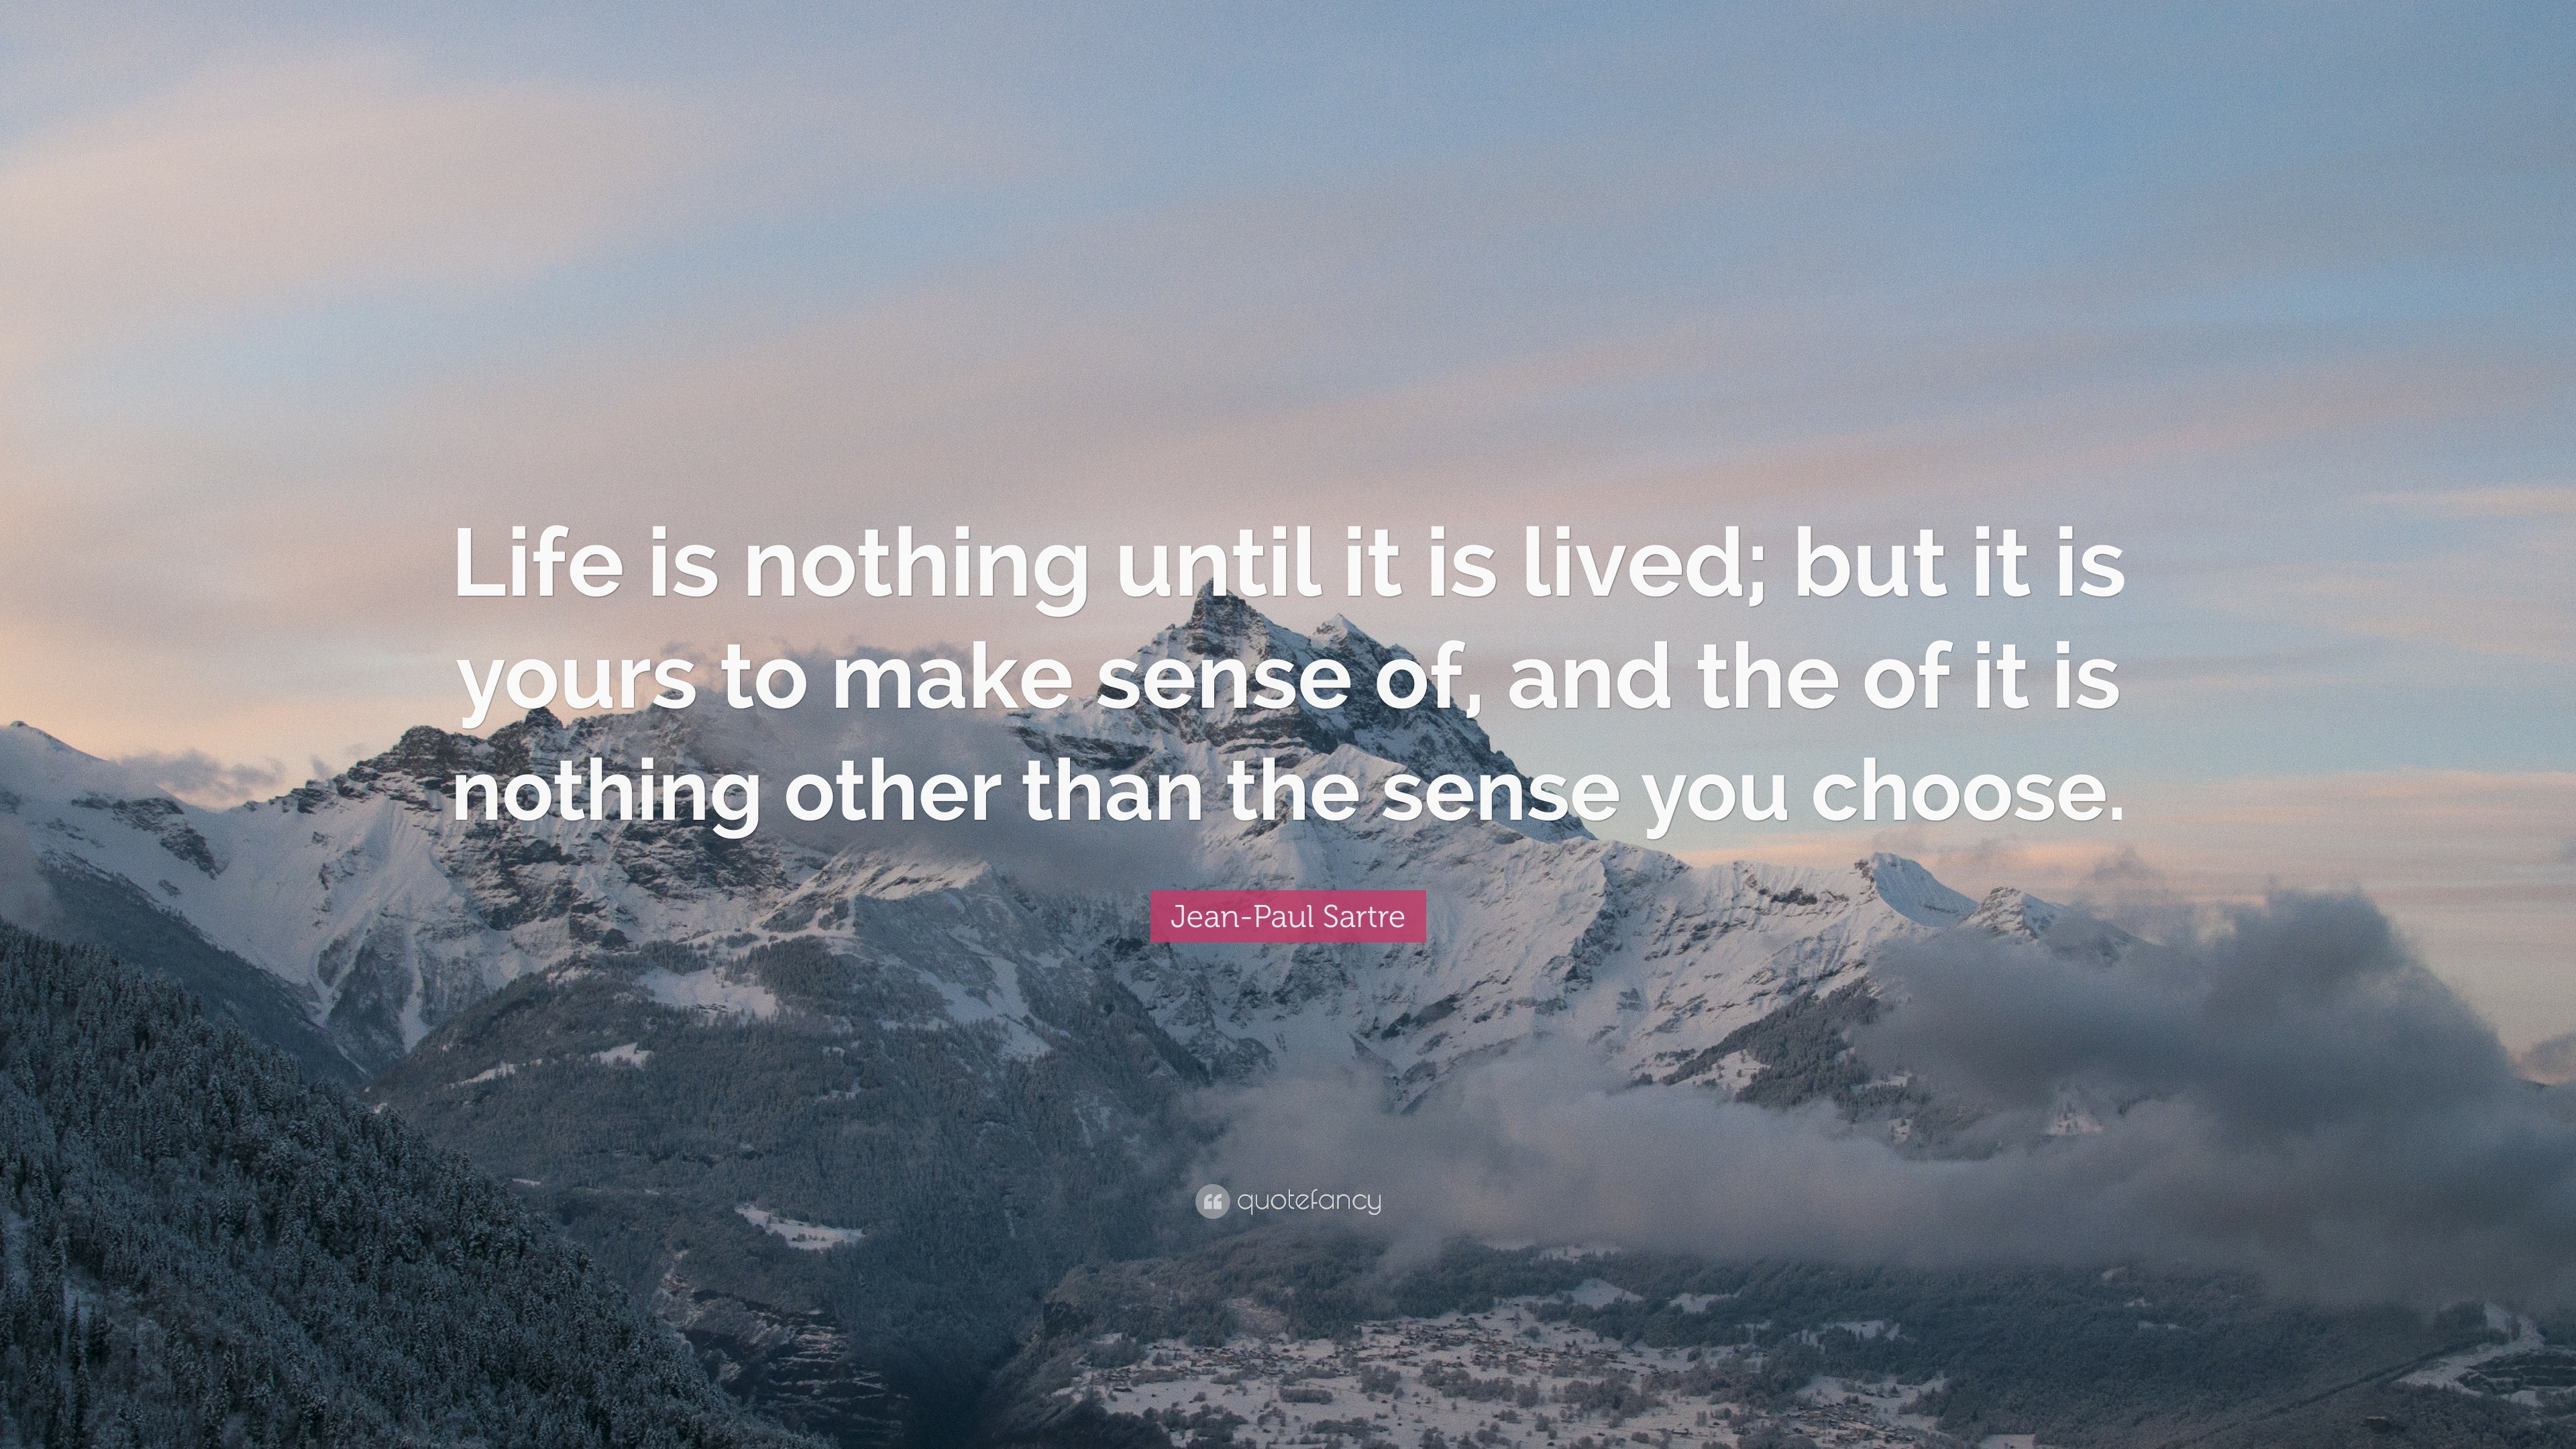 Jean Paul Sartre Quote “Life is nothing until it is lived but